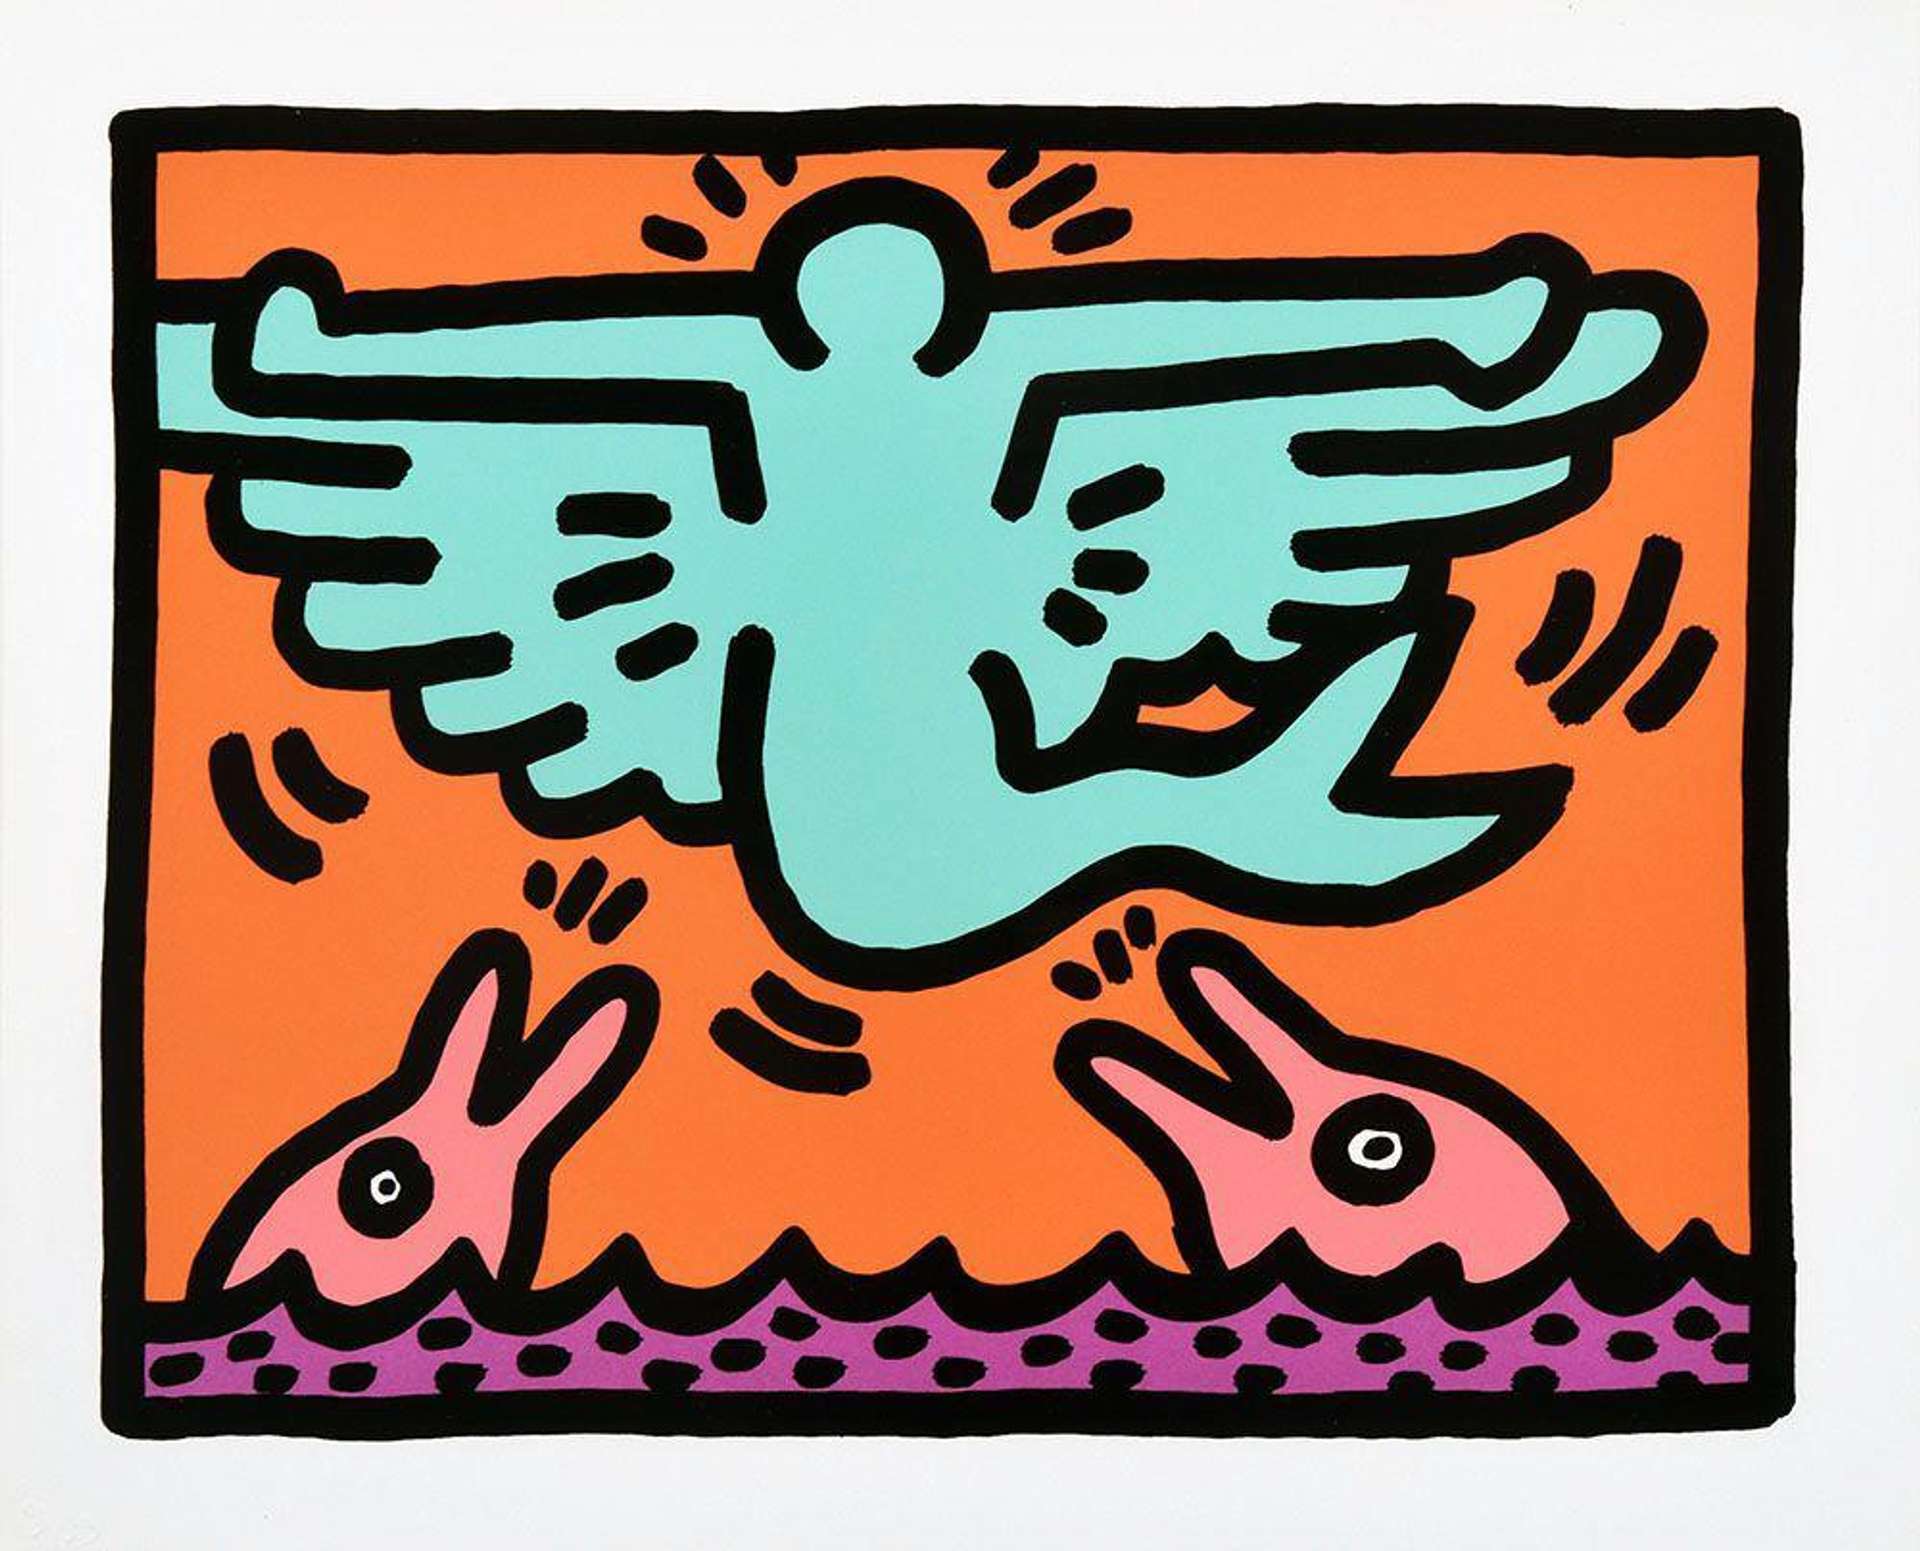 Keith Haring’s Pop Shop V, Plate III. A Pop Art screenprint of a winged, blue figure with a fish tail flying above two pink dolphins in a pink sea.